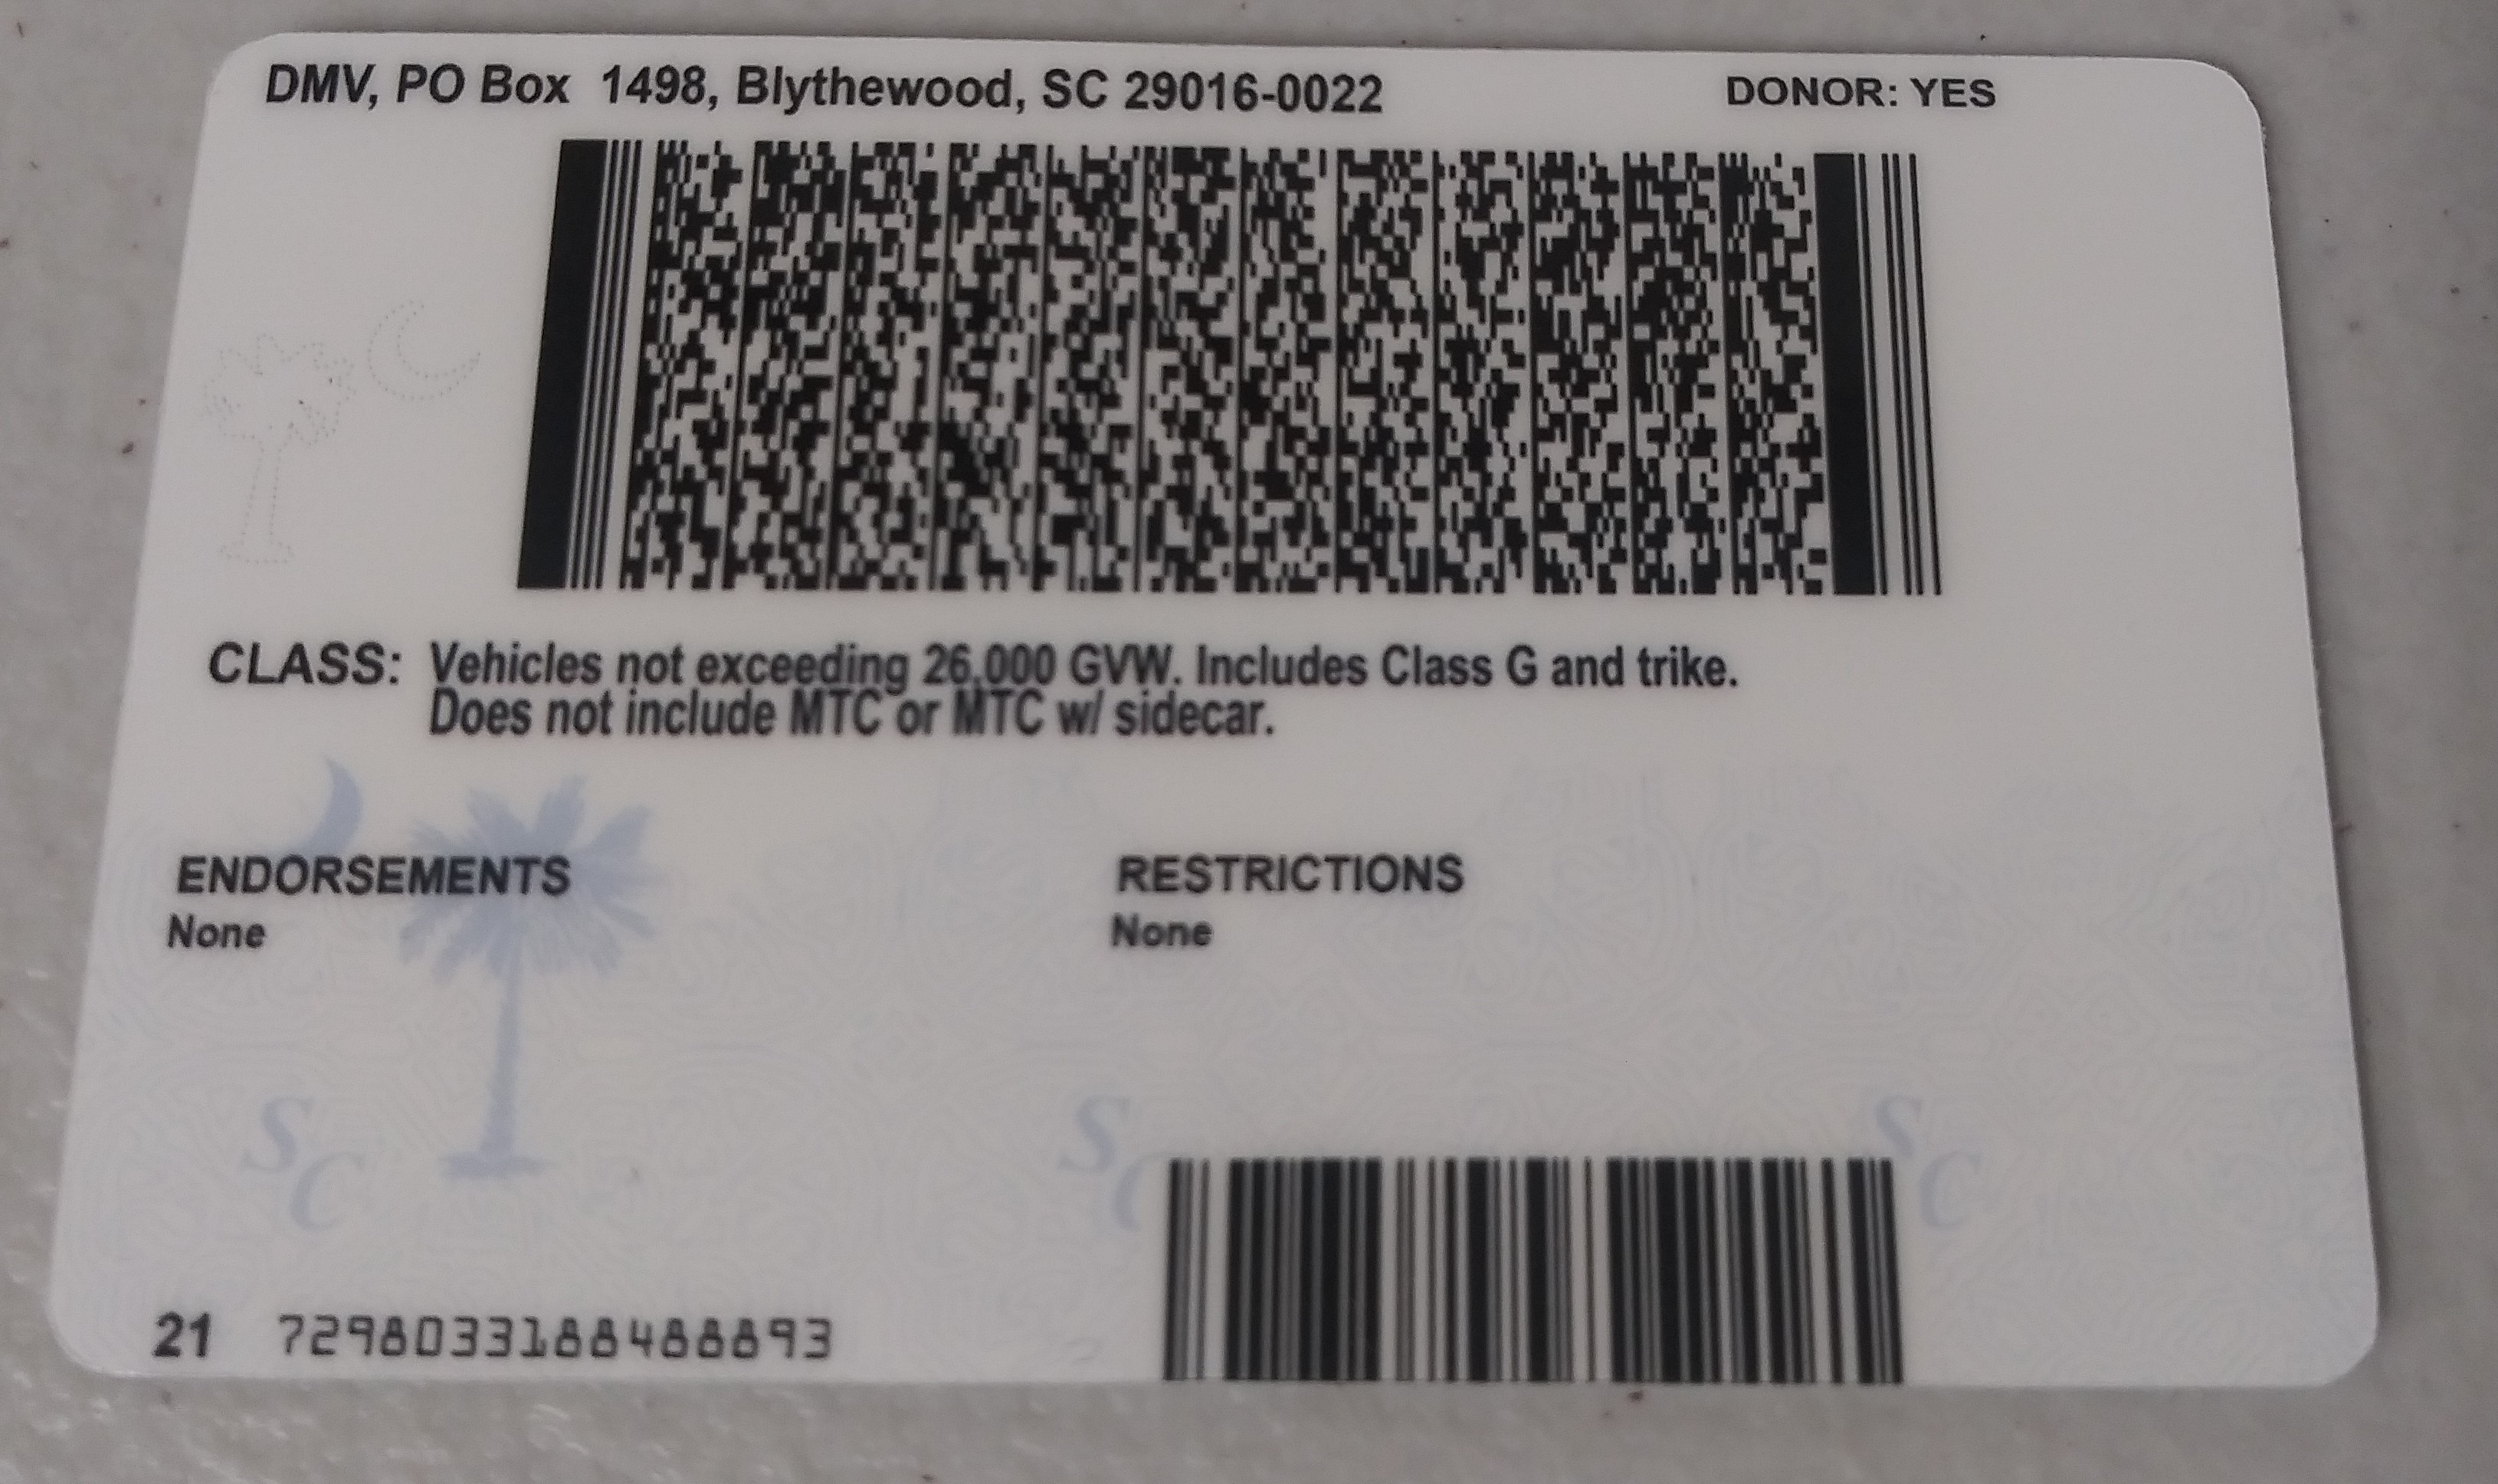 texas driver license barcode format